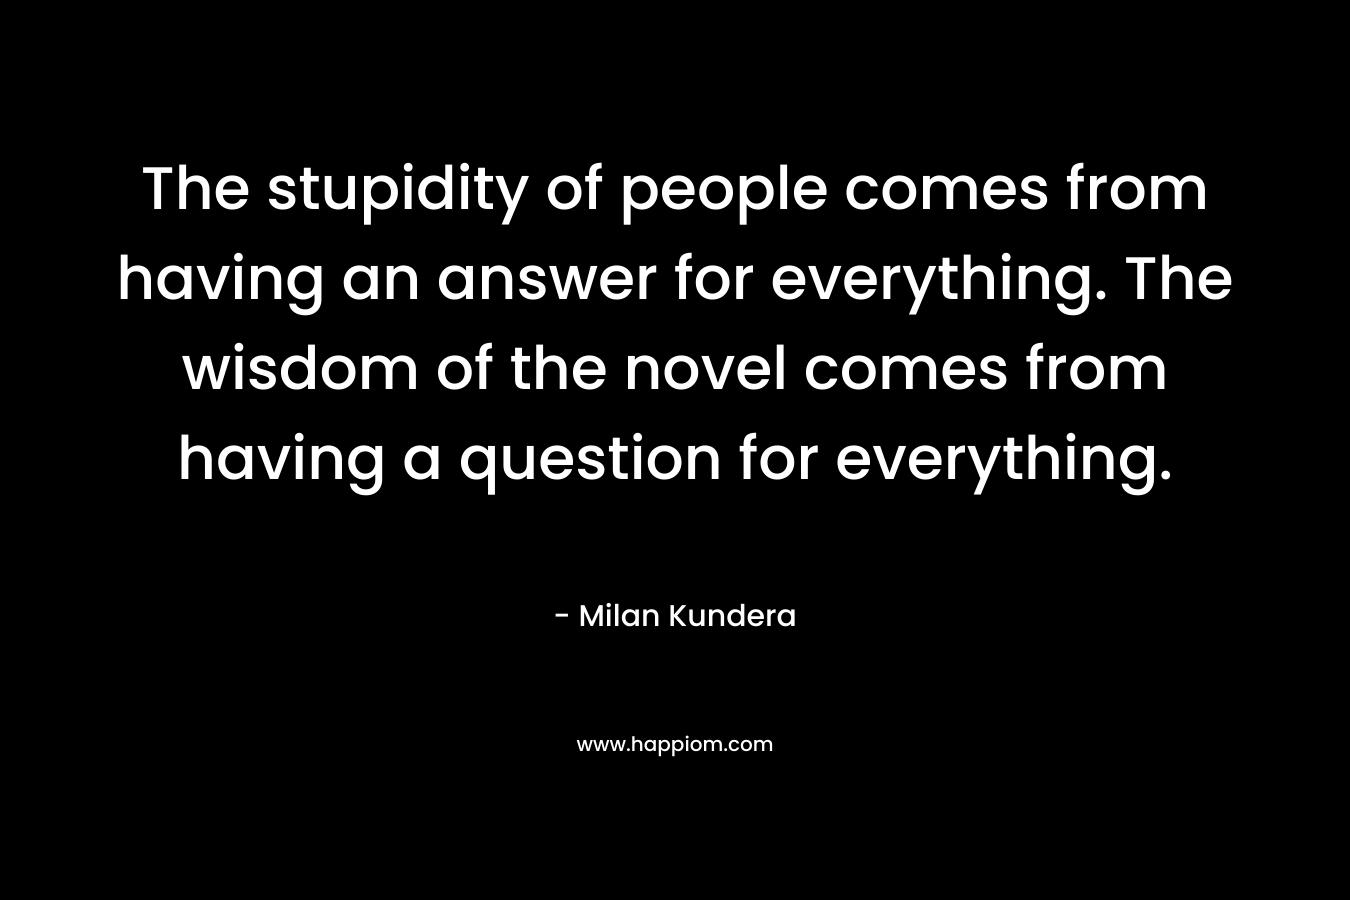 The stupidity of people comes from having an answer for everything. The wisdom of the novel comes from having a question for everything.